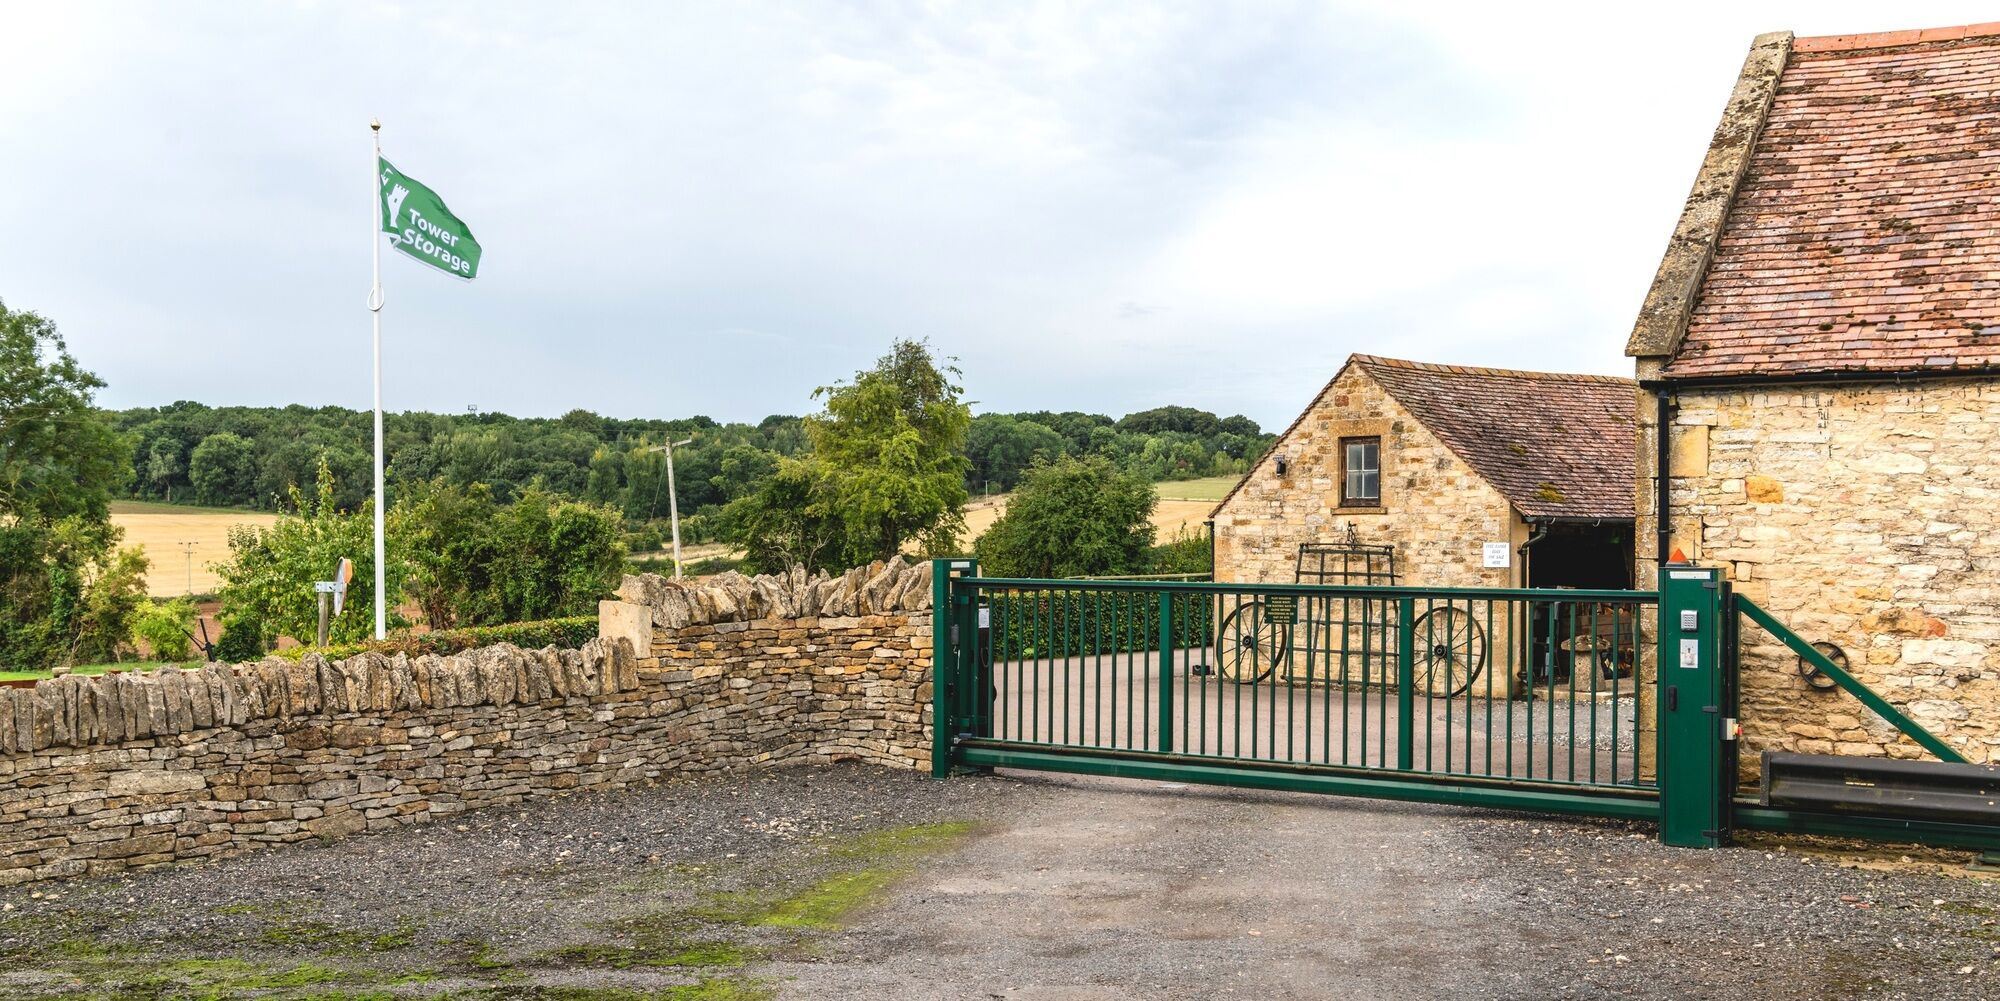 Secure automatic gate at entrance to caravan storage